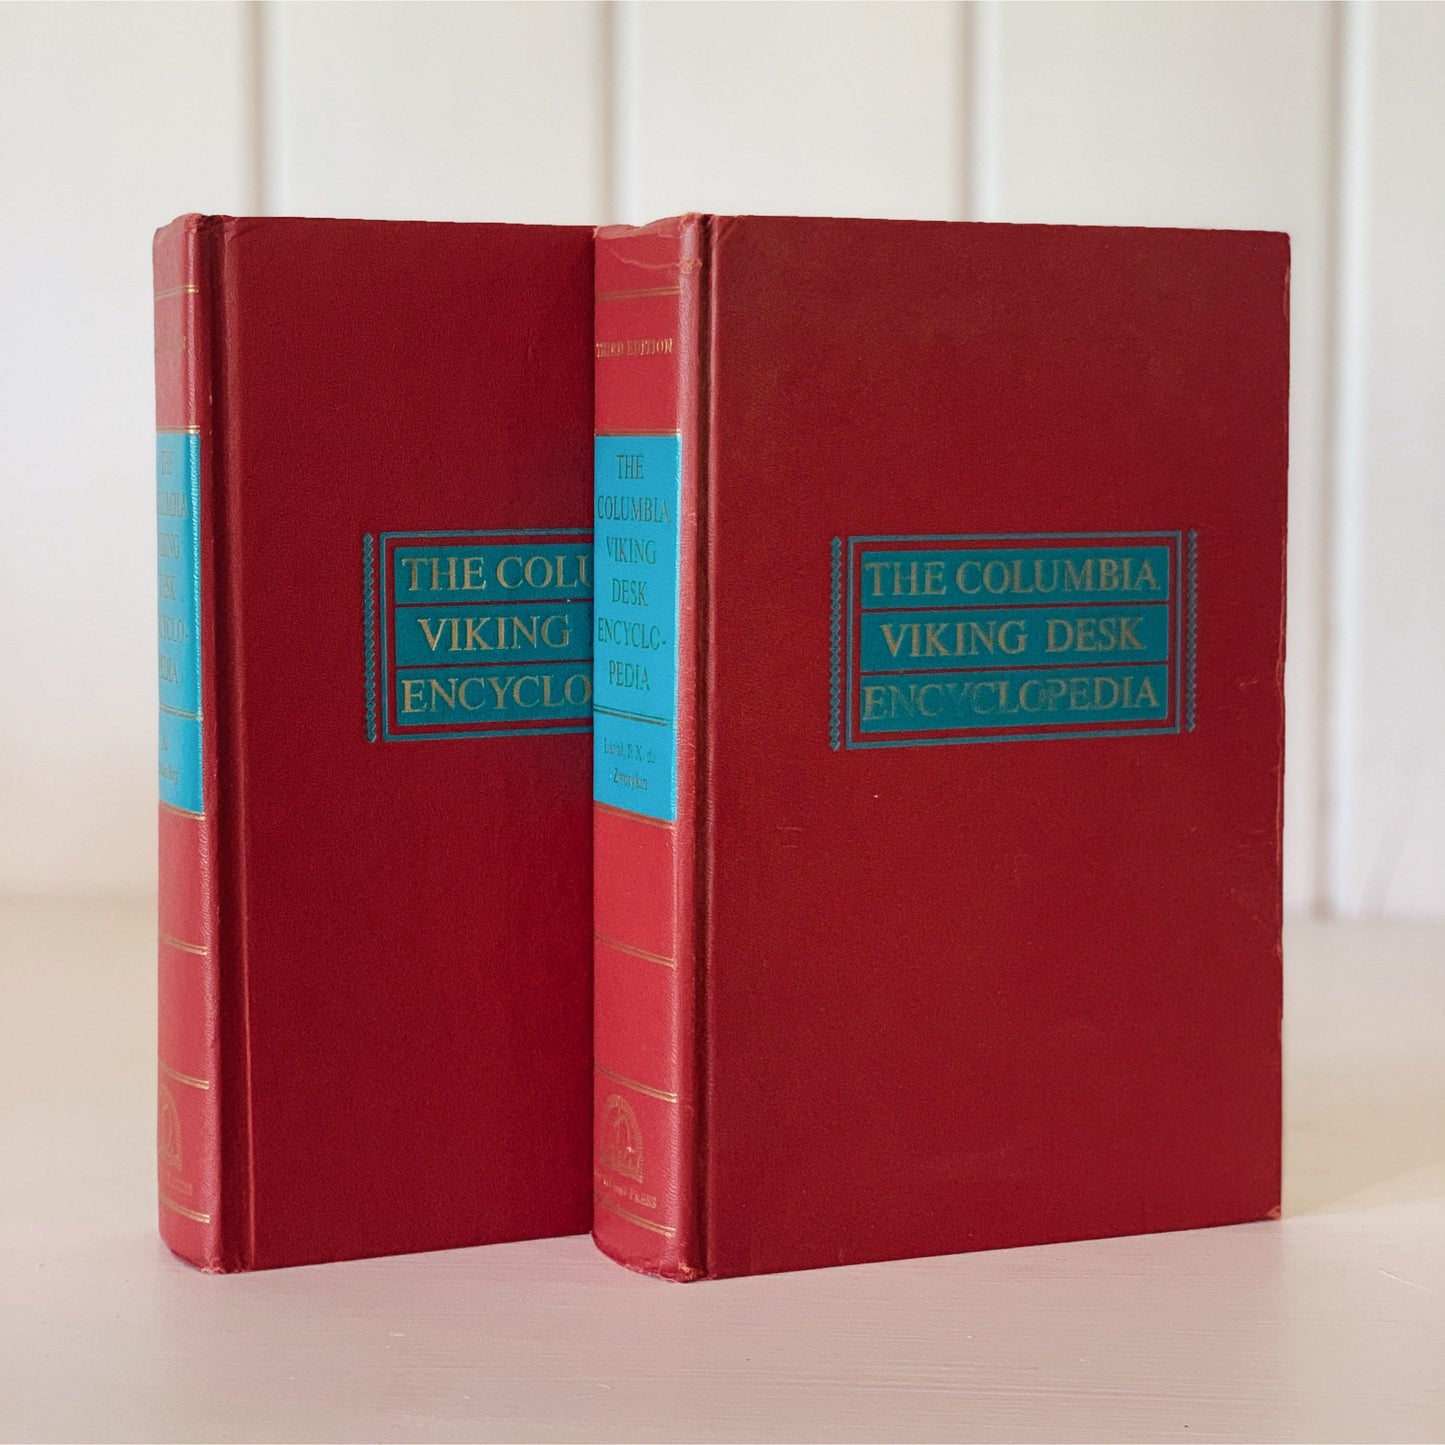 The Columbia Viking Desk Encyclopedia, 1968, Red and Turquoise, Hardcover Set